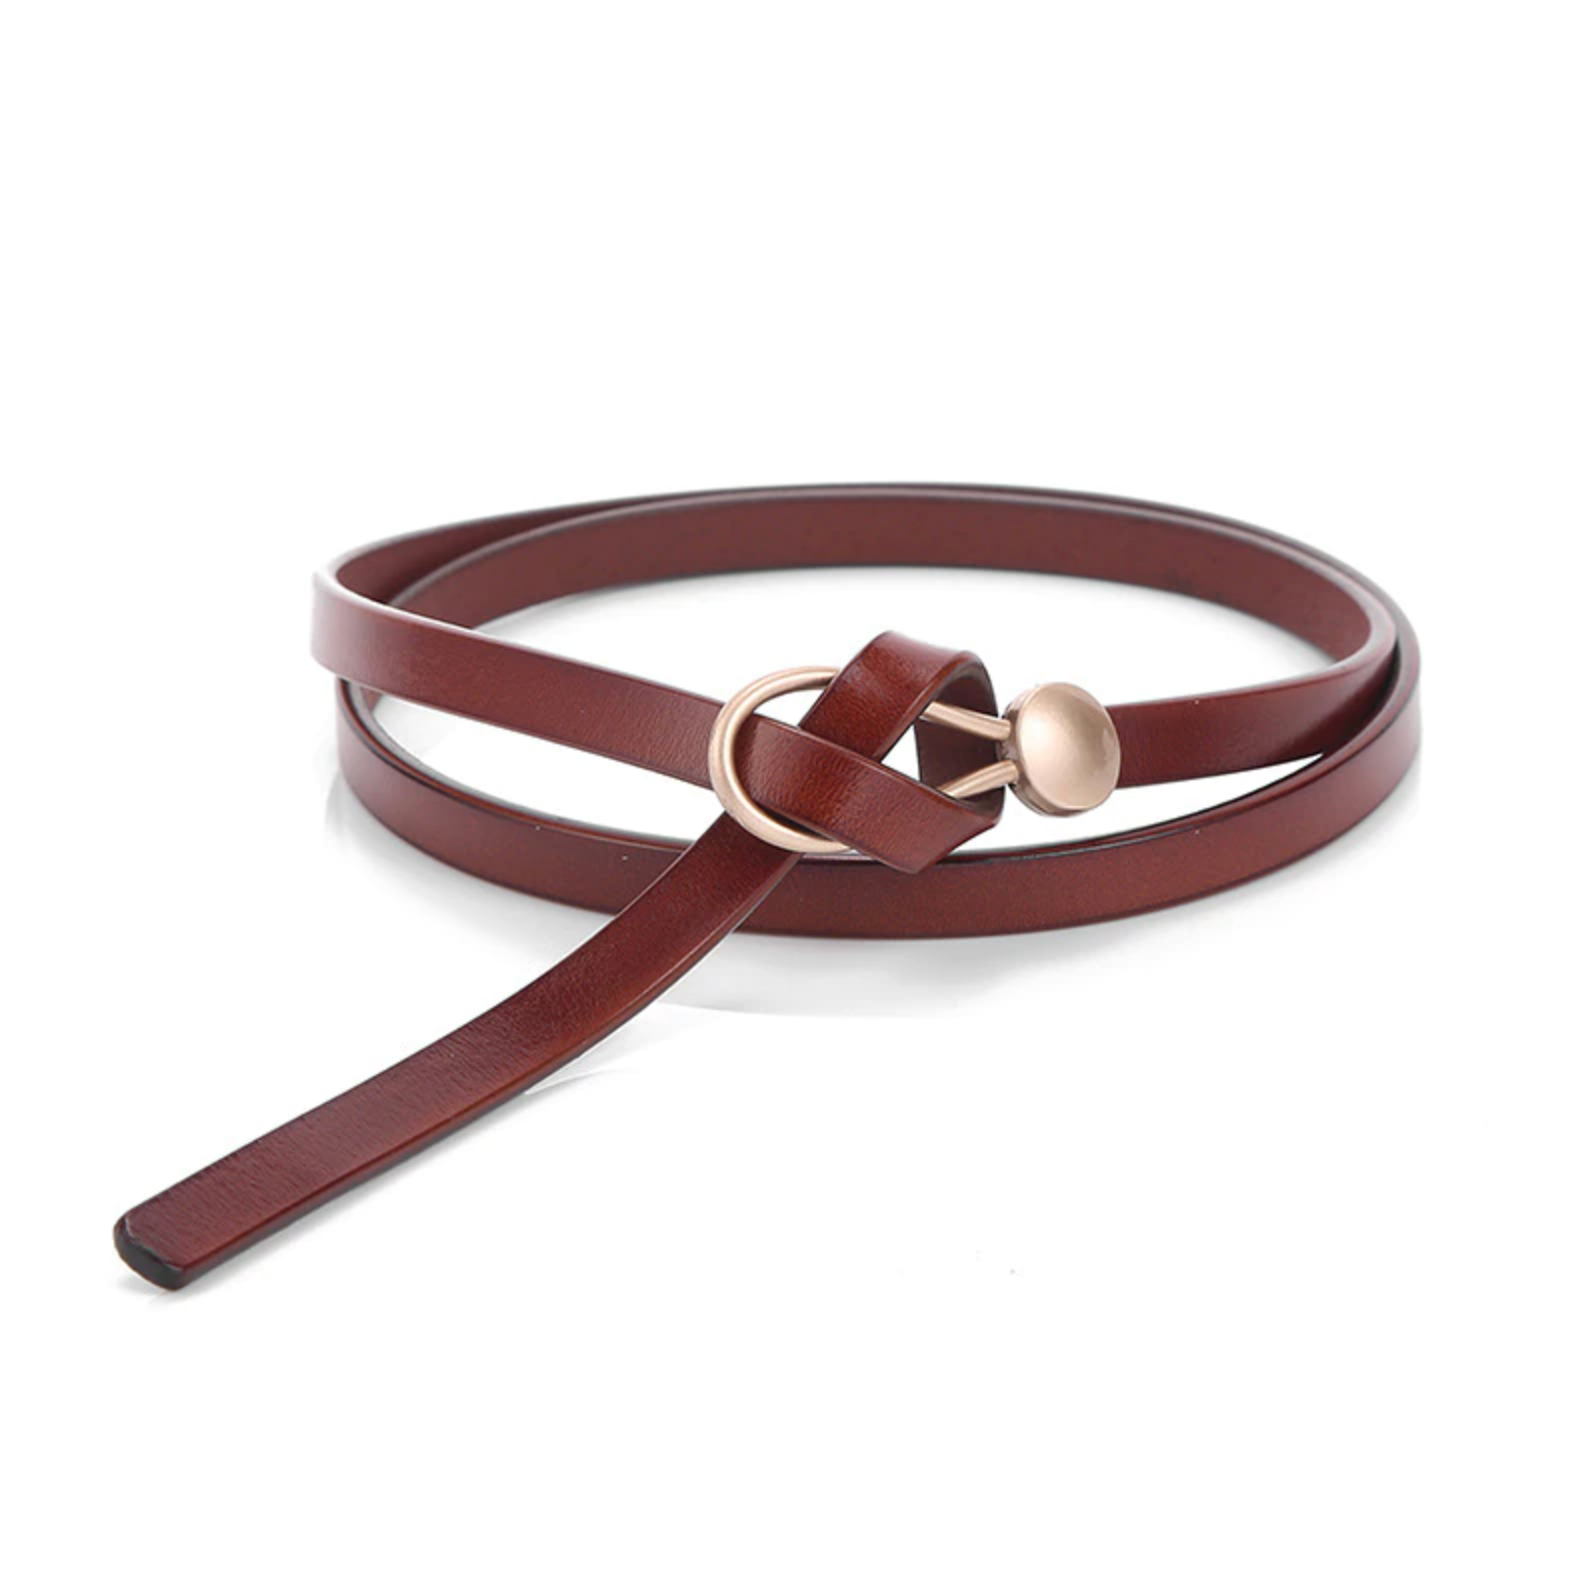 RILEY-ROSE LUXURIOUS LEATHER BELT